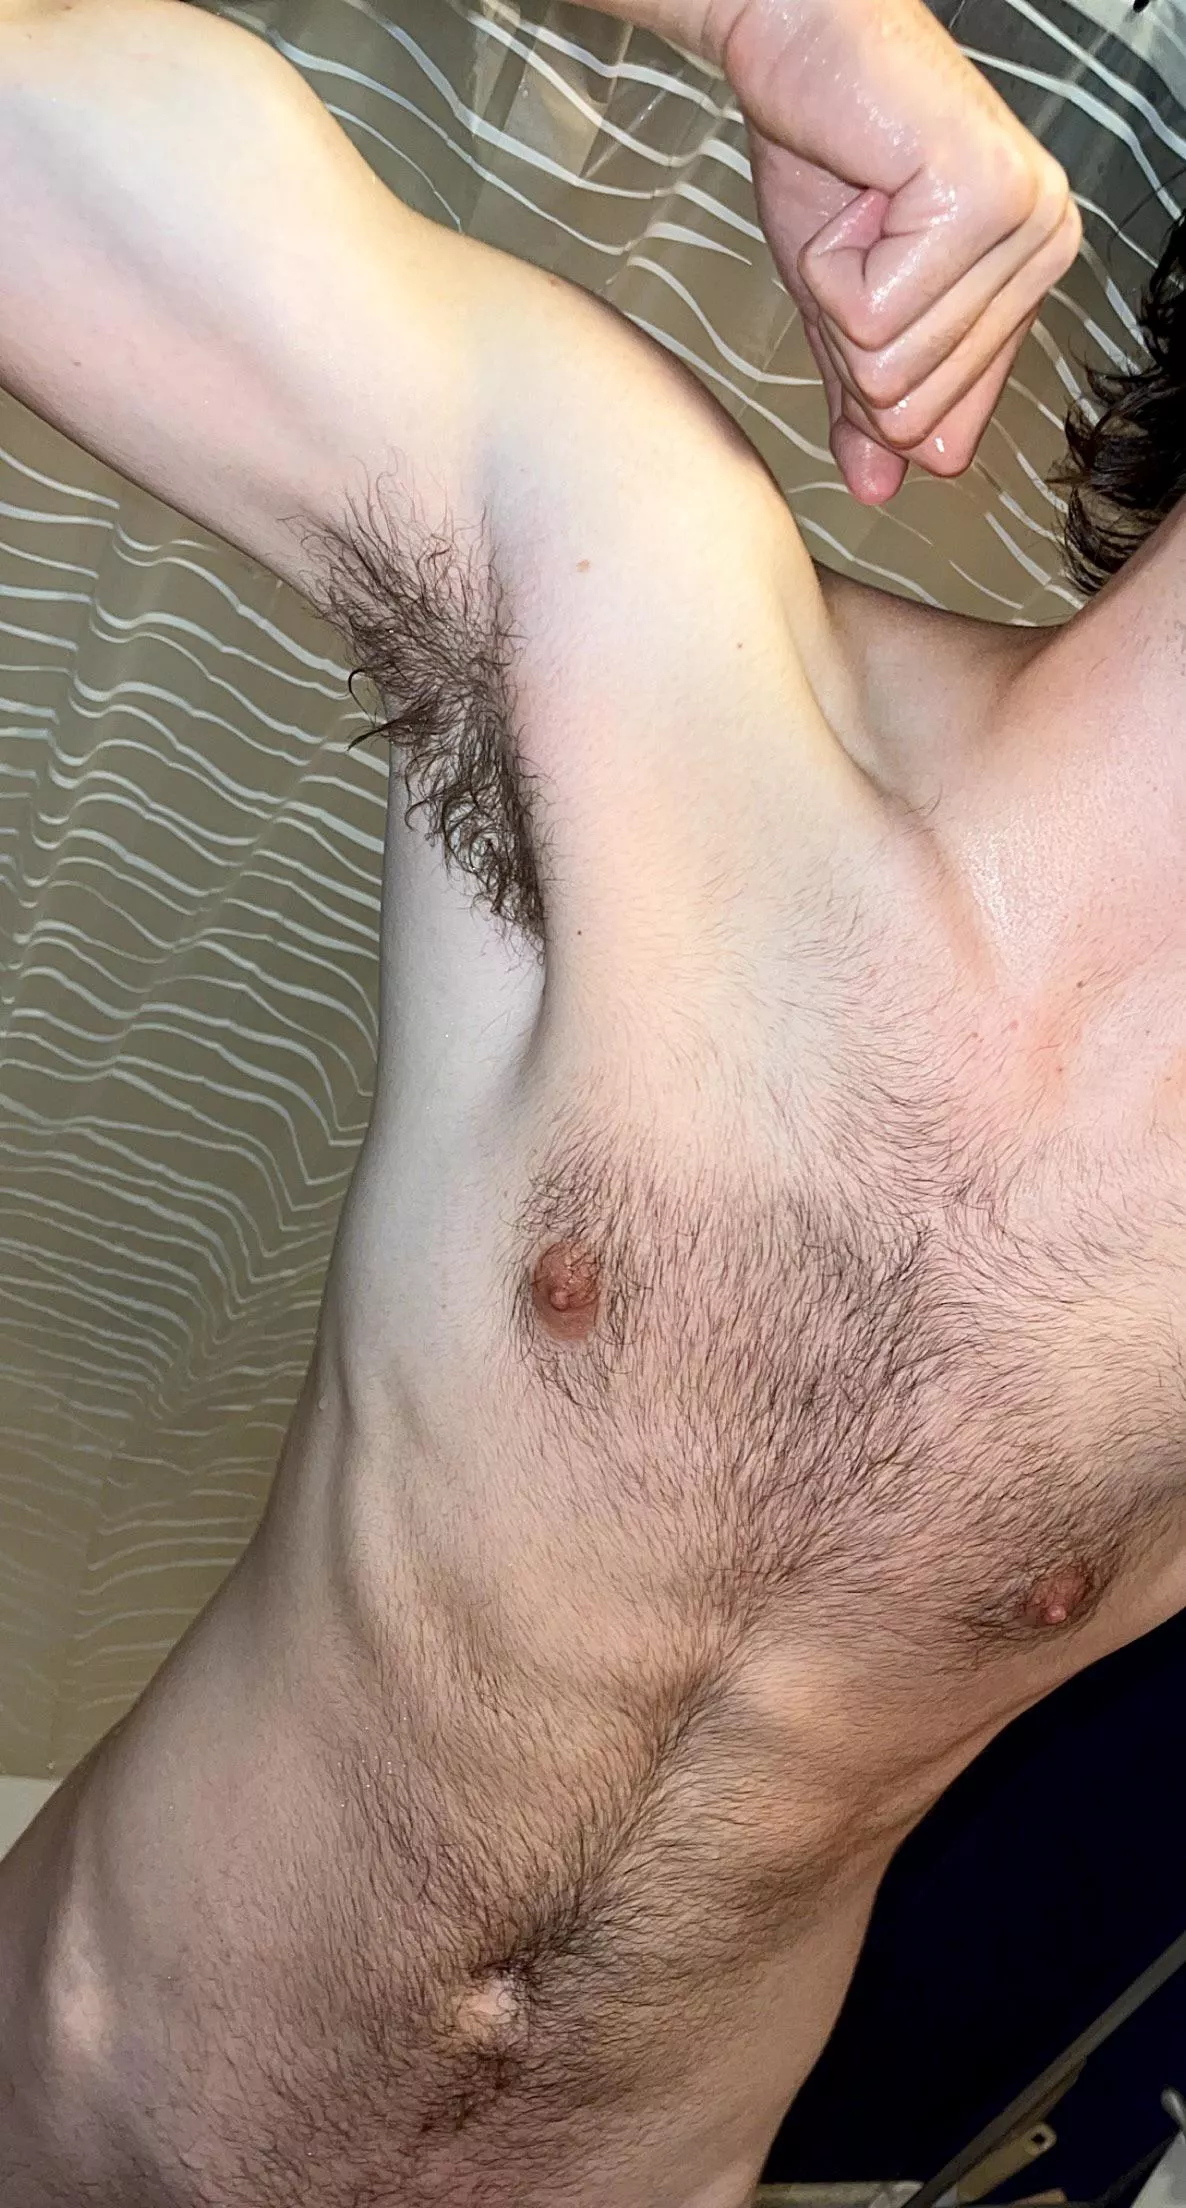 Hairy Twink Porn